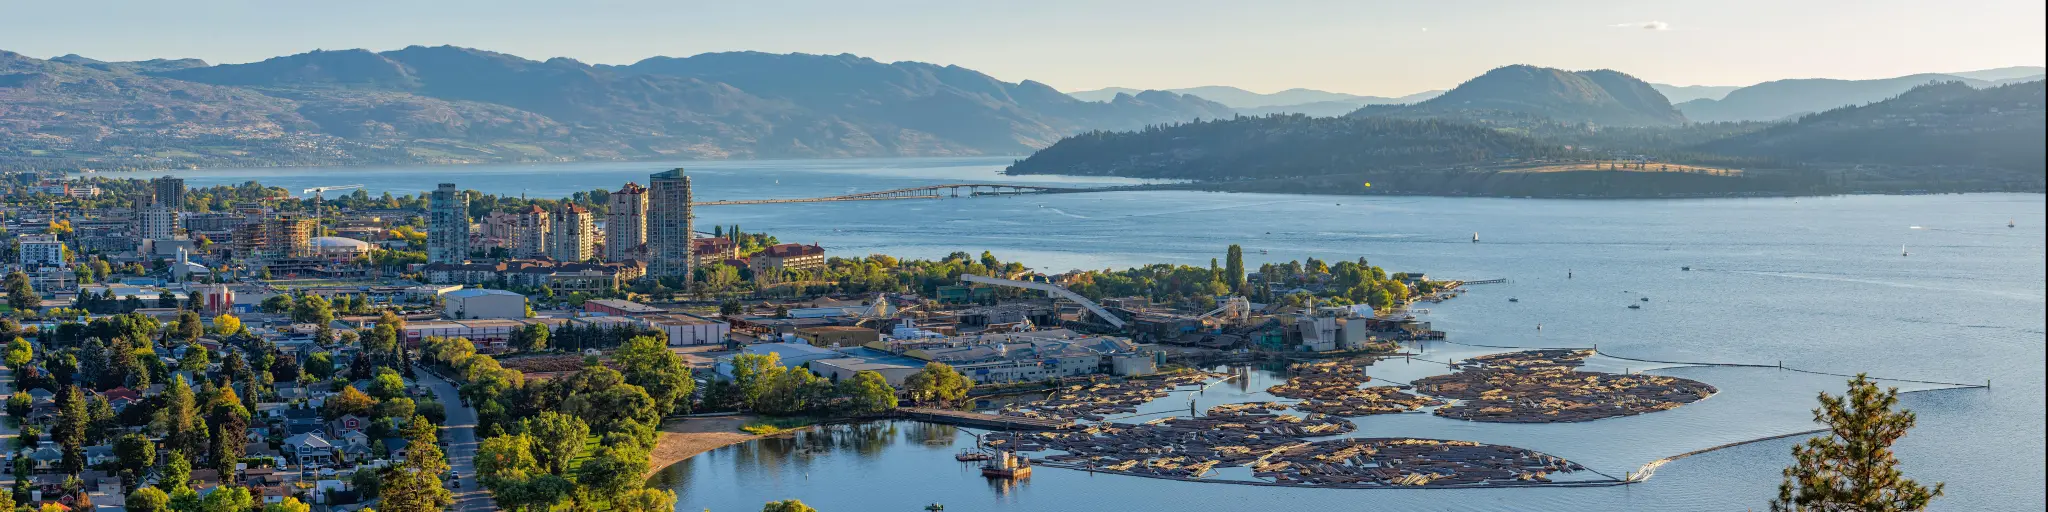 Kelowna, British Columbia, Canada with a high resolution panorama of the city skyline and Okanagan Lake with the R W Bennett Bridge in the background, from Knox Mountain at sunset.